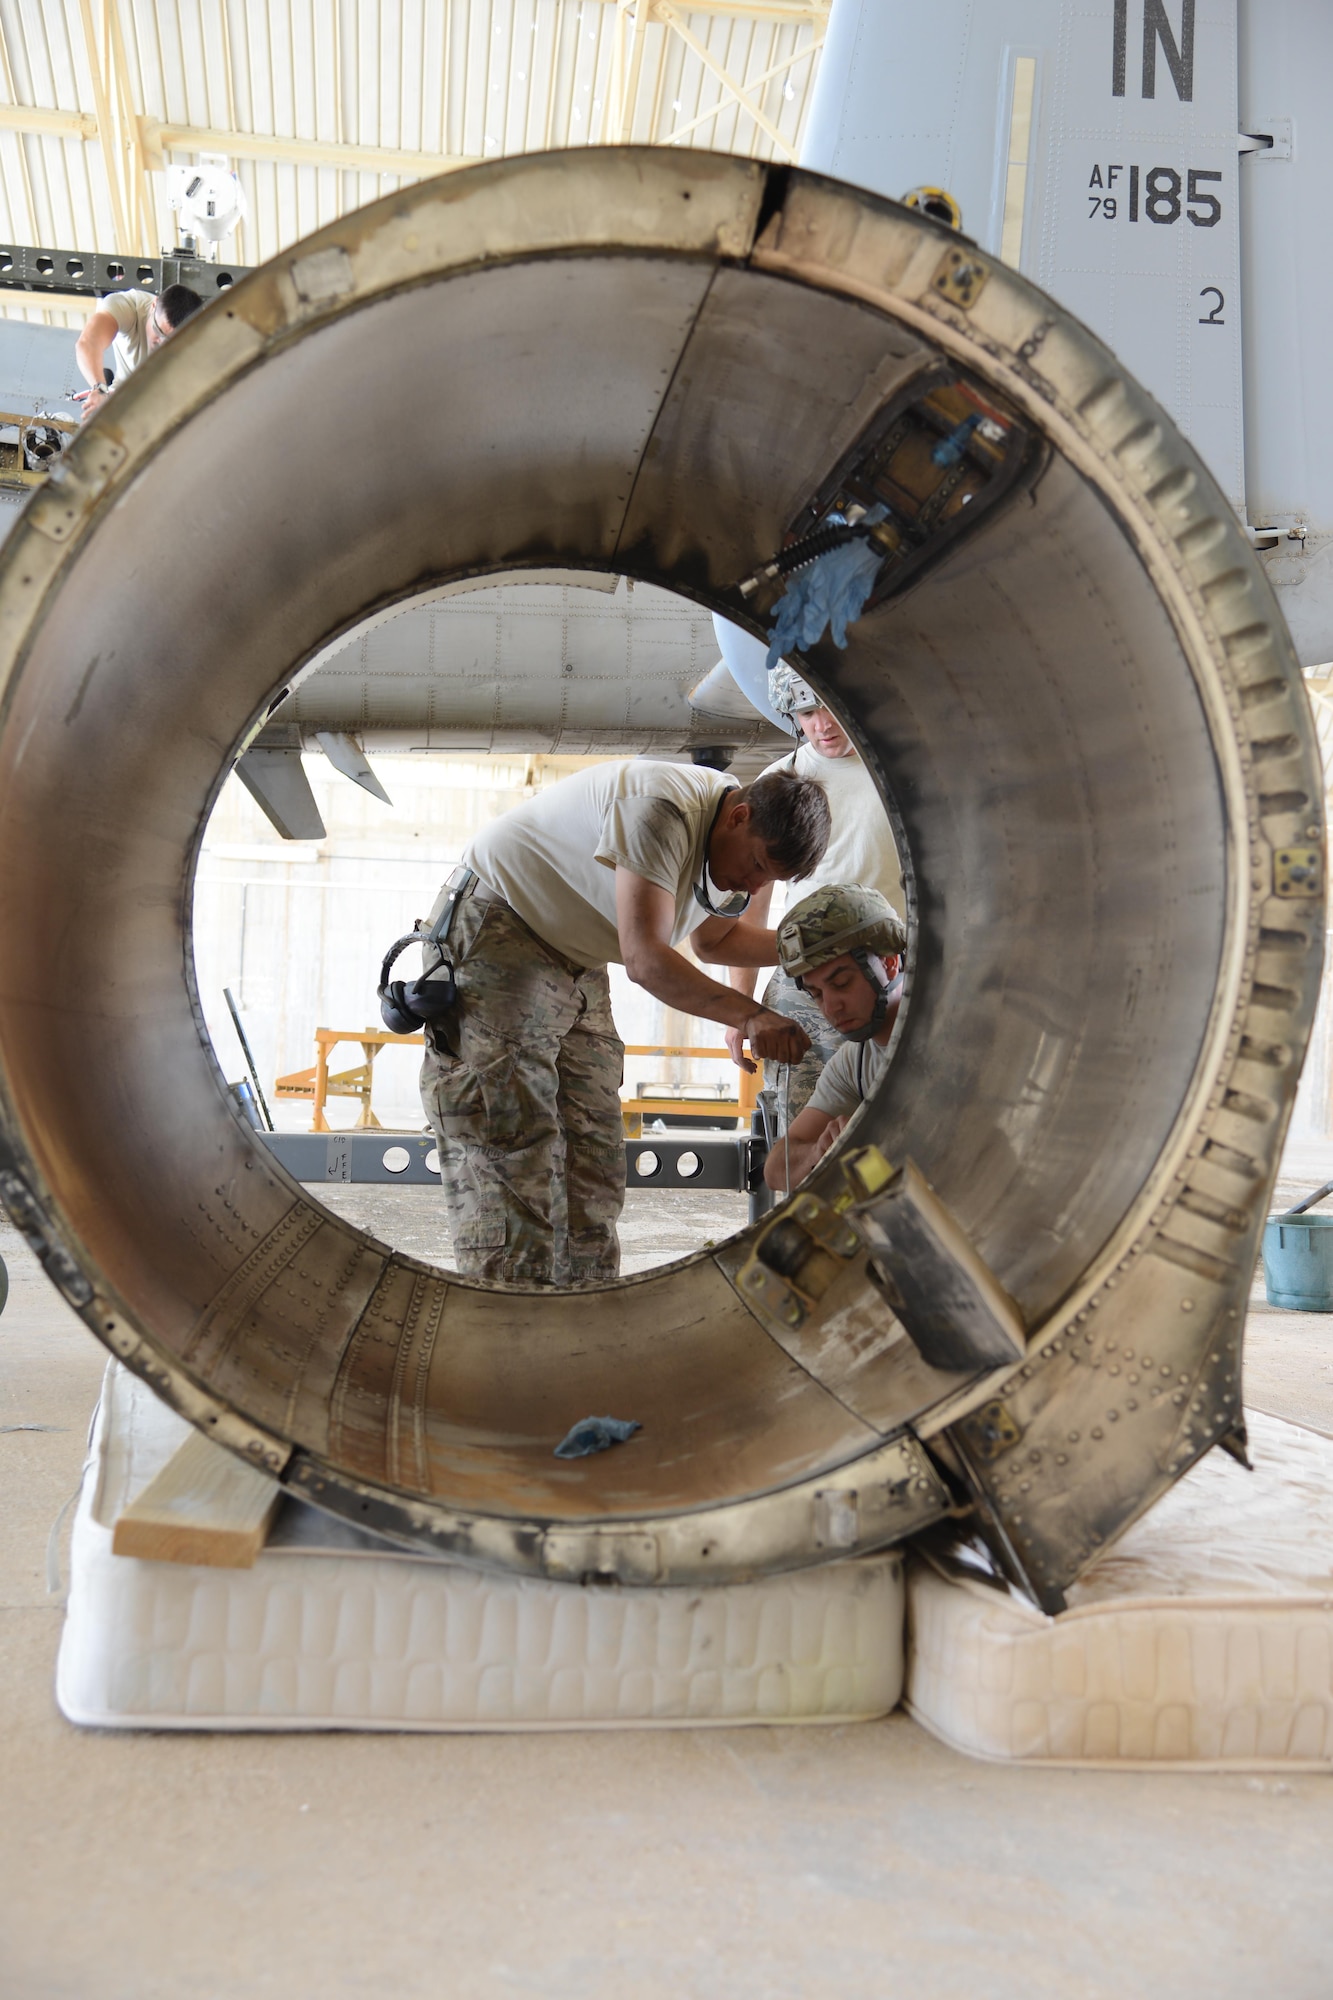 An Airman with the 332nd Expeditionary Maintenance Group prepares a damaged nacelle, the protective covering on the engine, from an A-10C Thunderbolt II for shipment at Al Asad Air Base, Iraq. A maintenance response team from the 332nd EMXG repaired the jet and got it back in the air less than five days after the jet suffered catastrophic engine failure and had to divert there. (U.S. Air Force photo by Tech. Sgt. Jared Marquis/released)